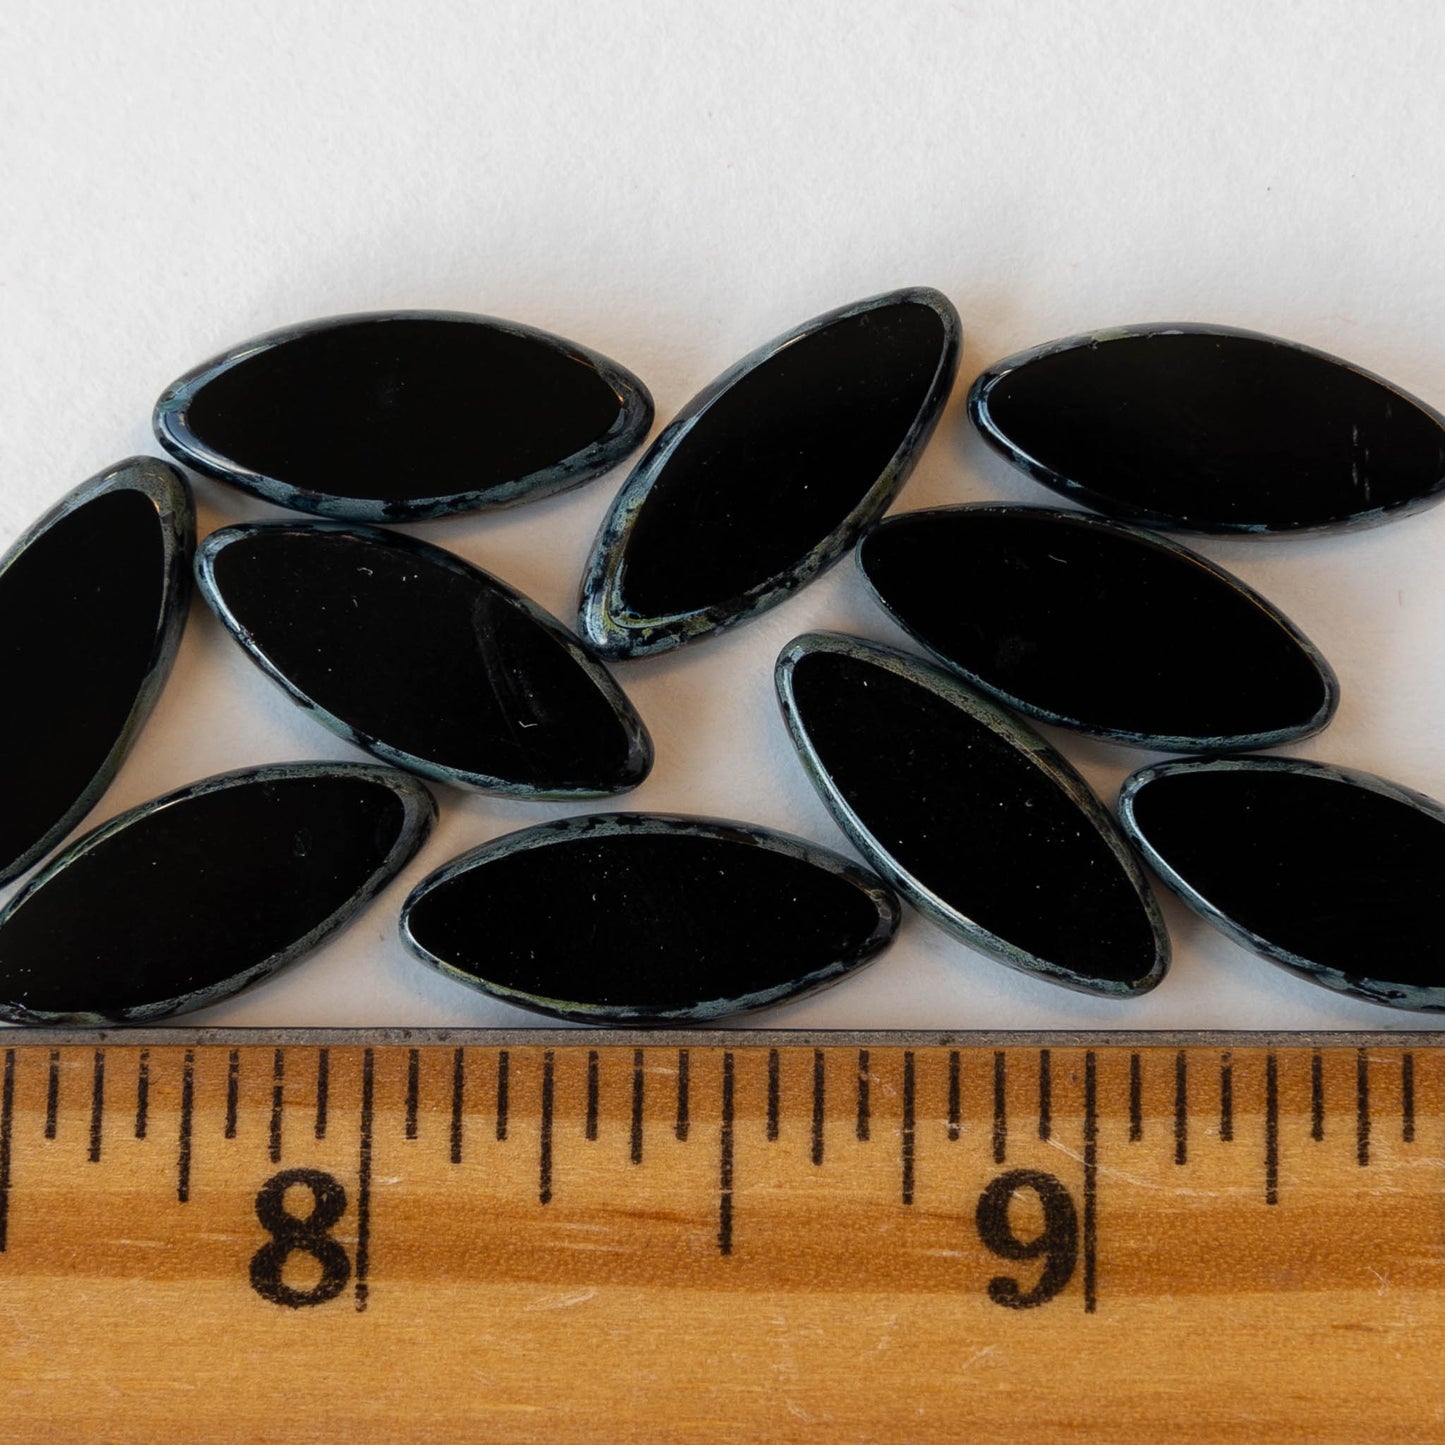 18mm Glass Spindle Beads - Black with Picasso Edges - 10 beads